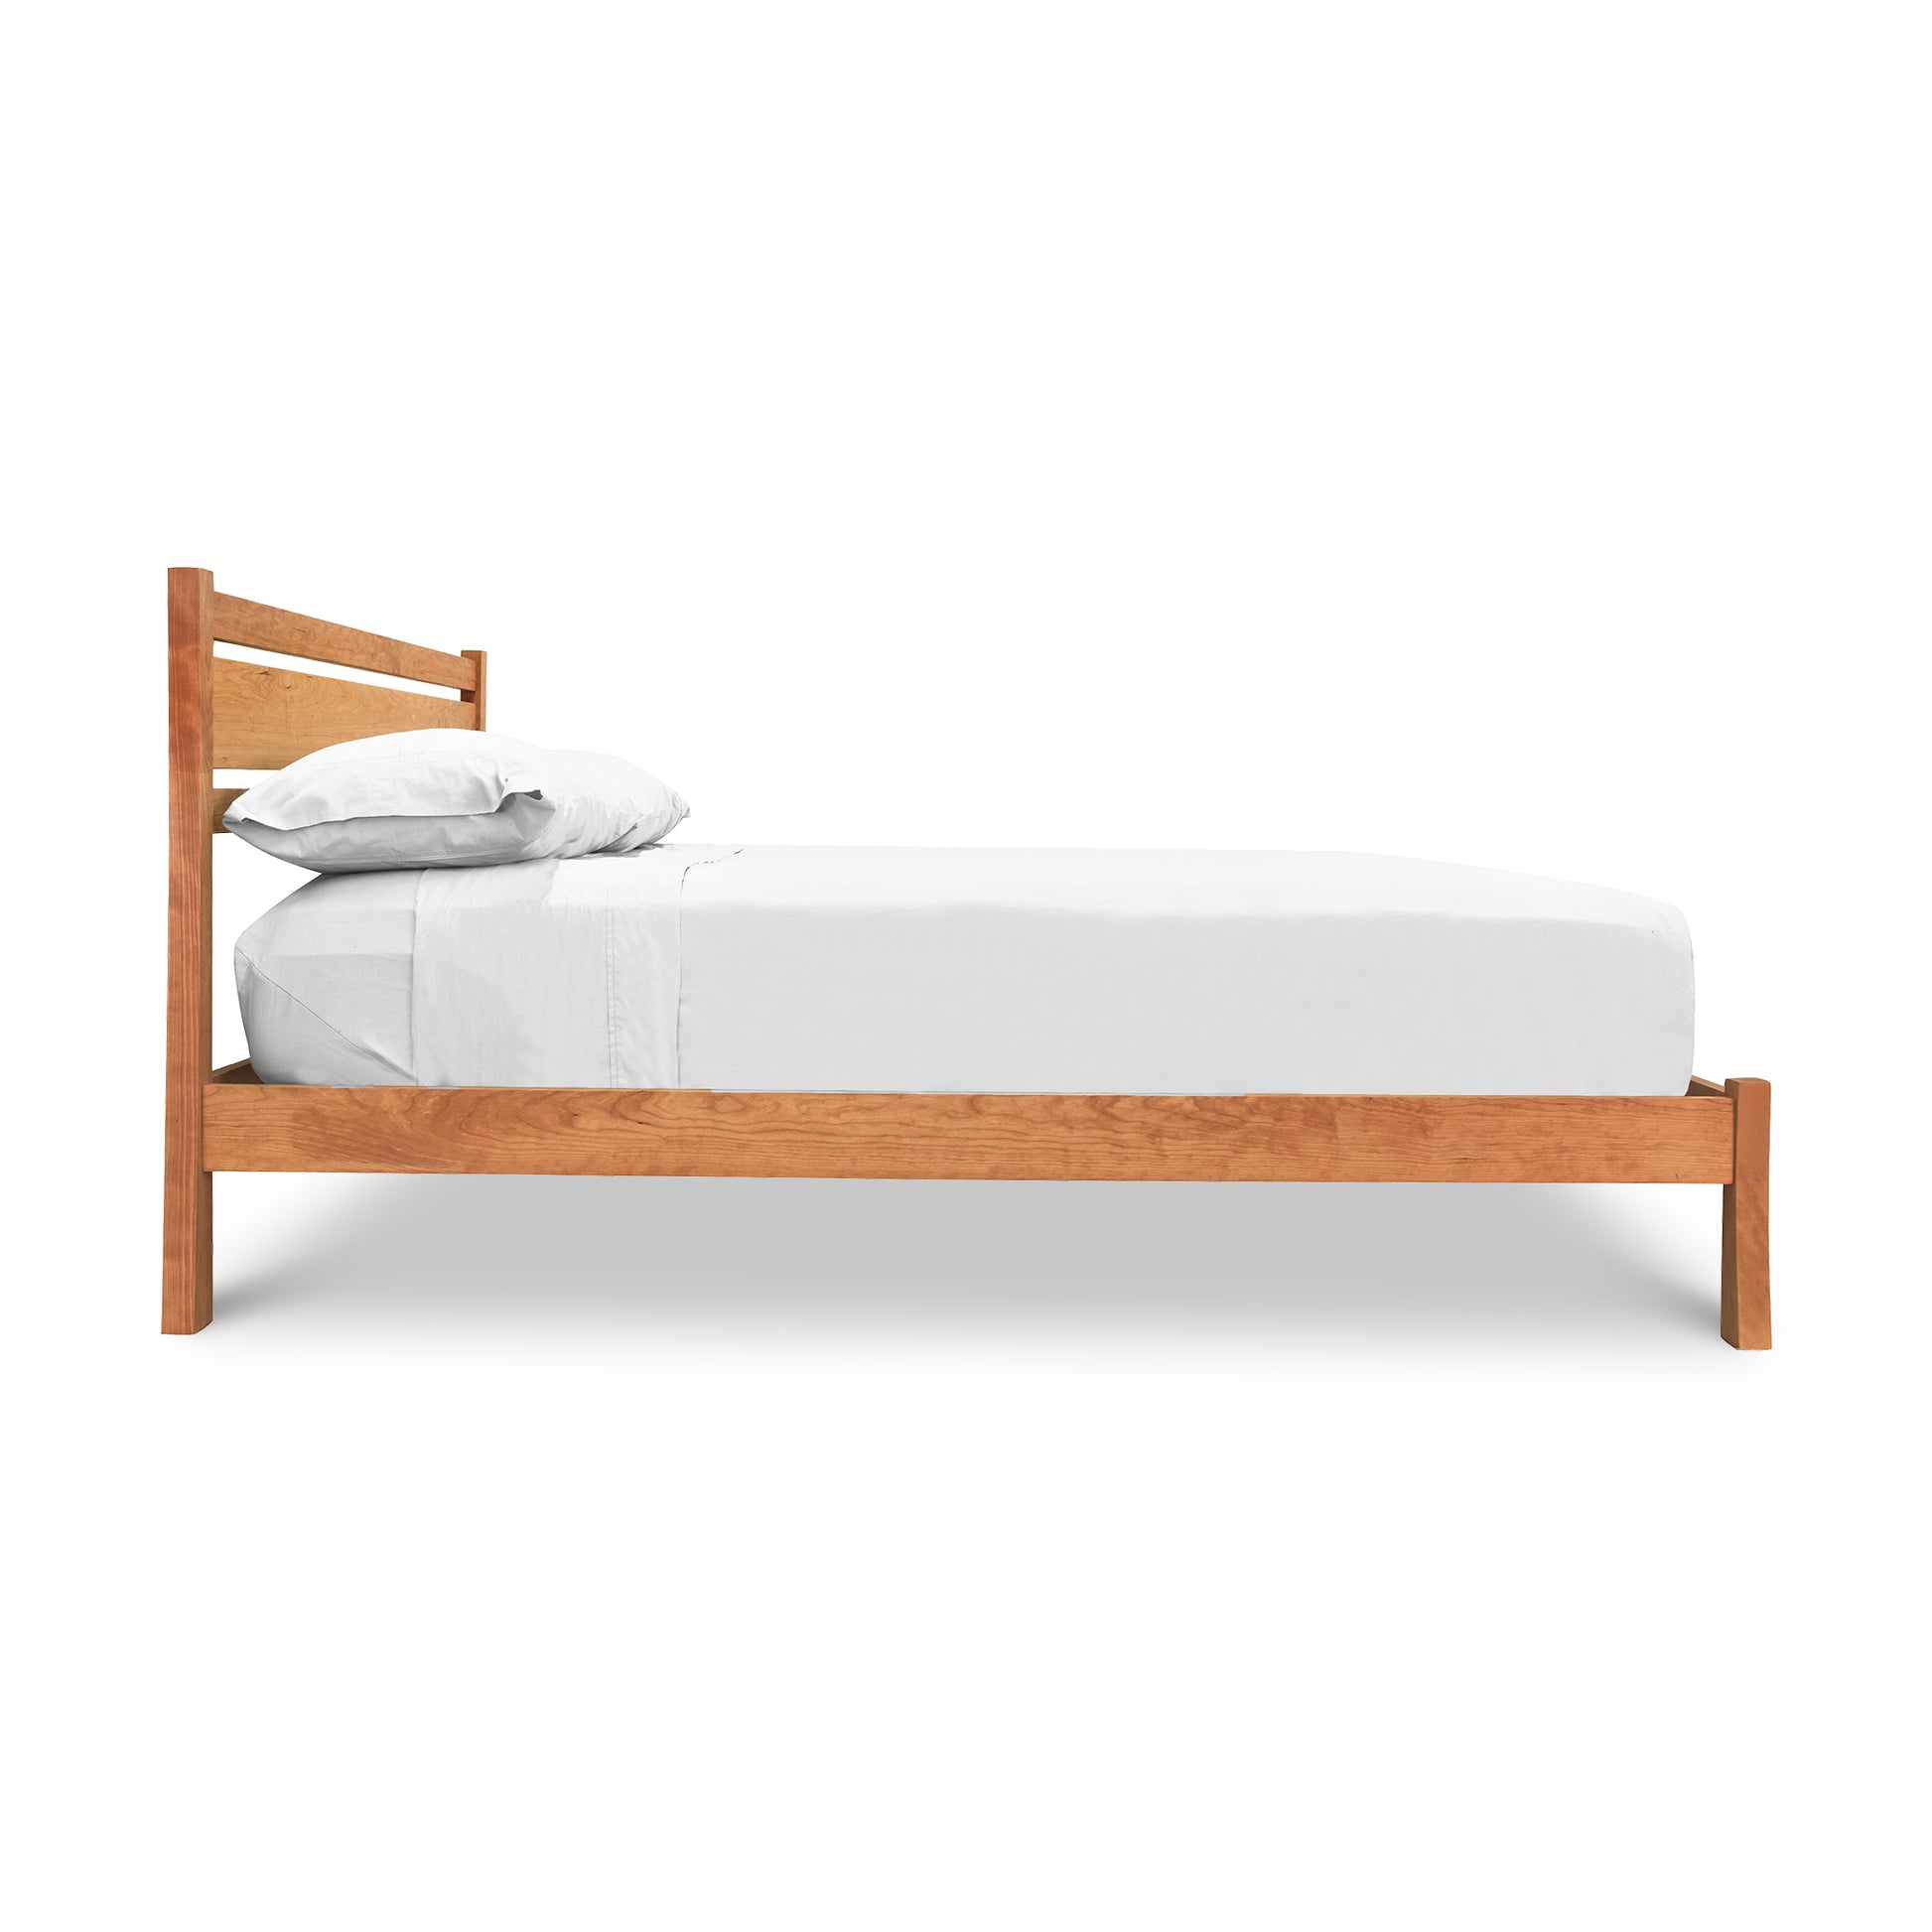 A contemporary Horizon Platform Bed with white sheets, featuring Arts and Crafts styling, made by Vermont Furniture Designs.